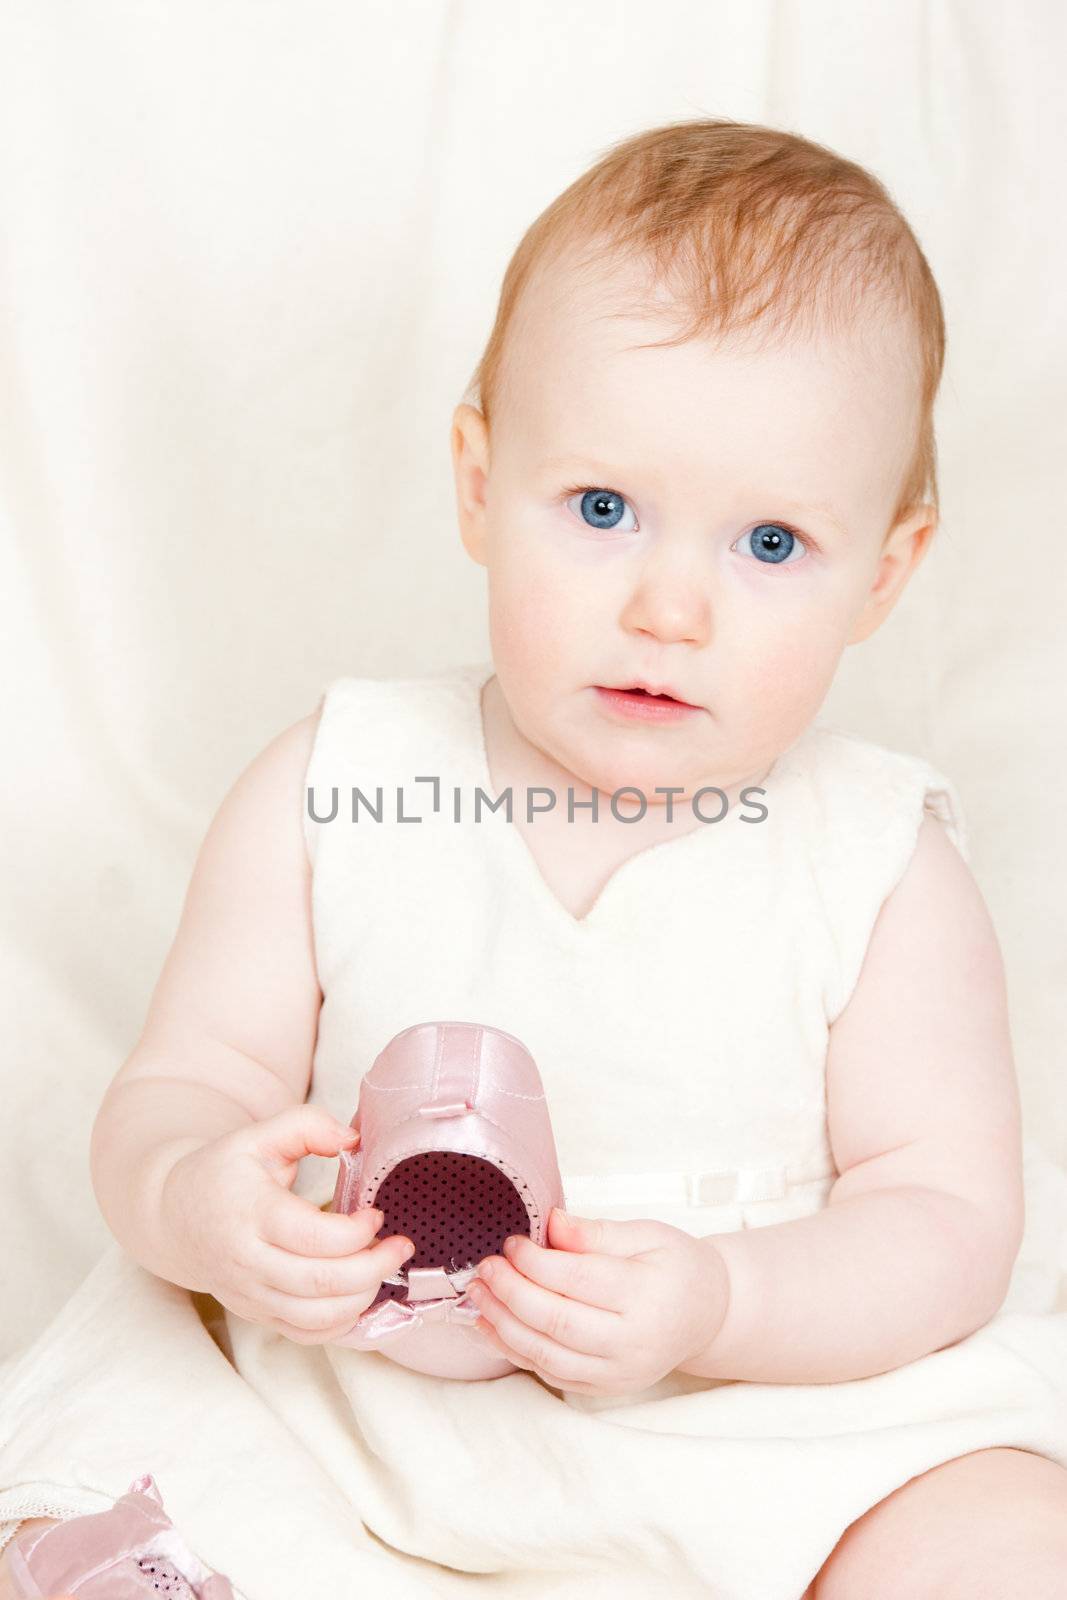 Infant with shoe by naumoid